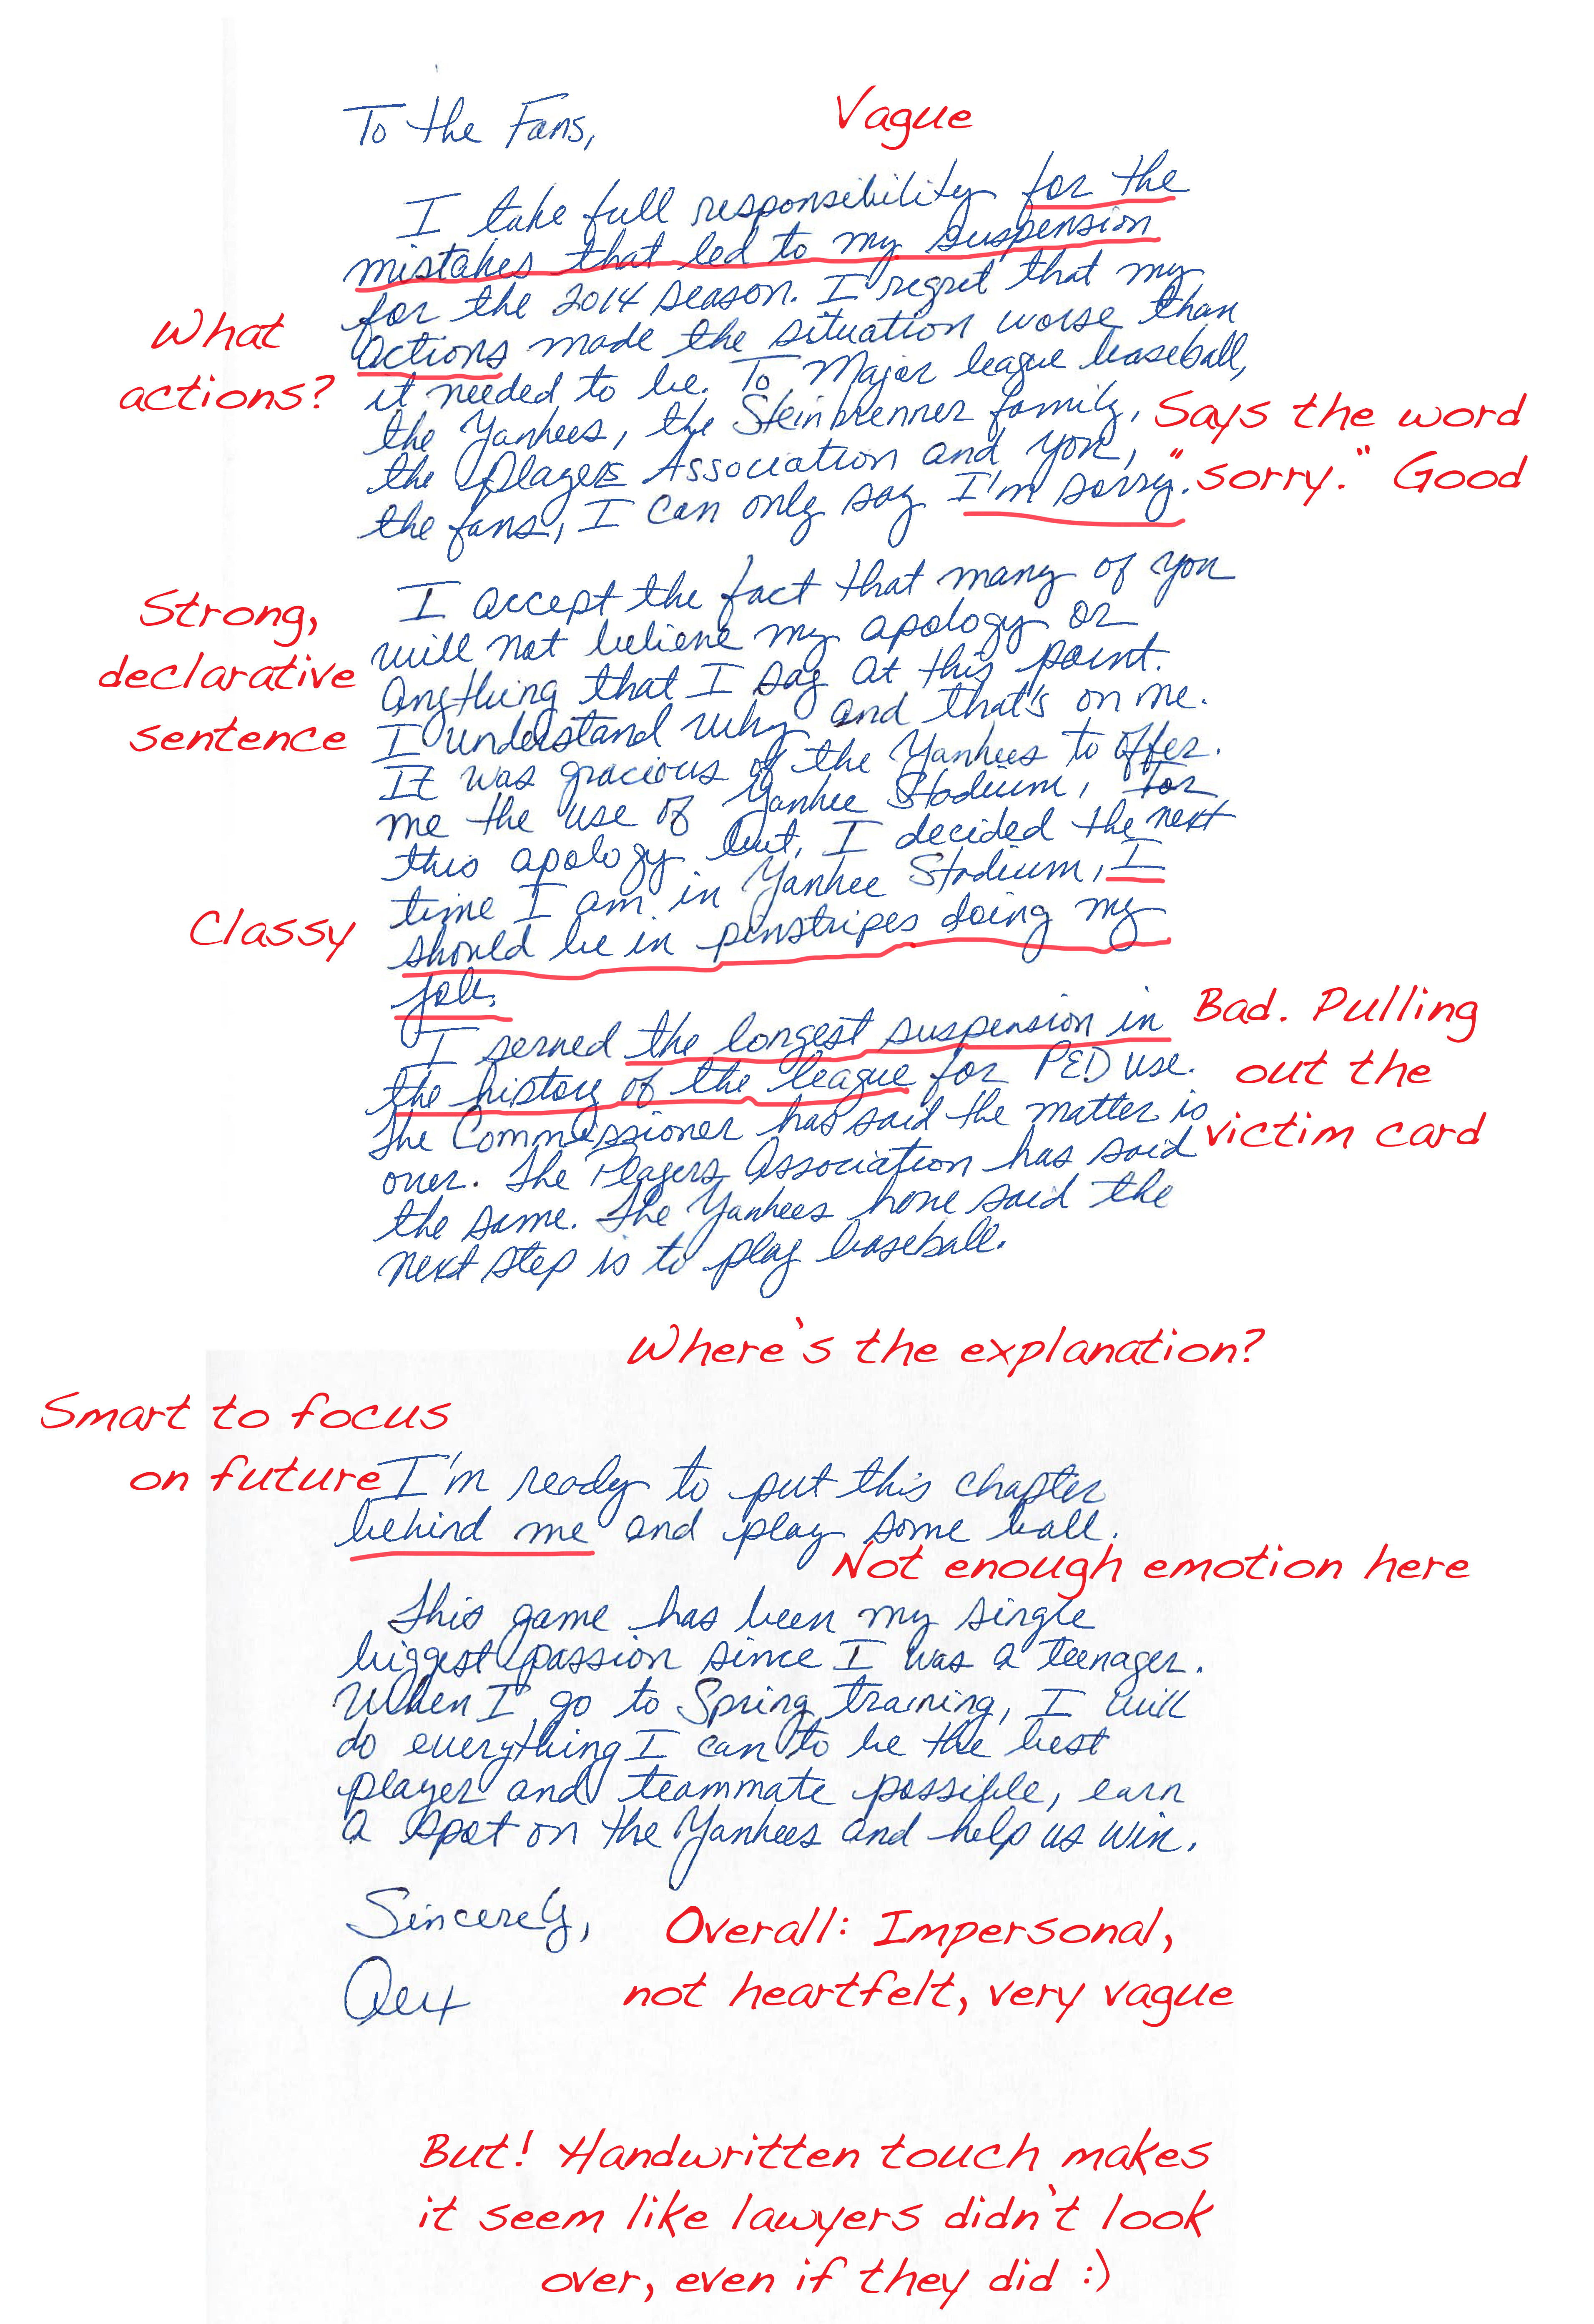 We Asked 5 Public Apology Experts To Critique A-Rod’s Handwritten Note. They Were Not Impressed